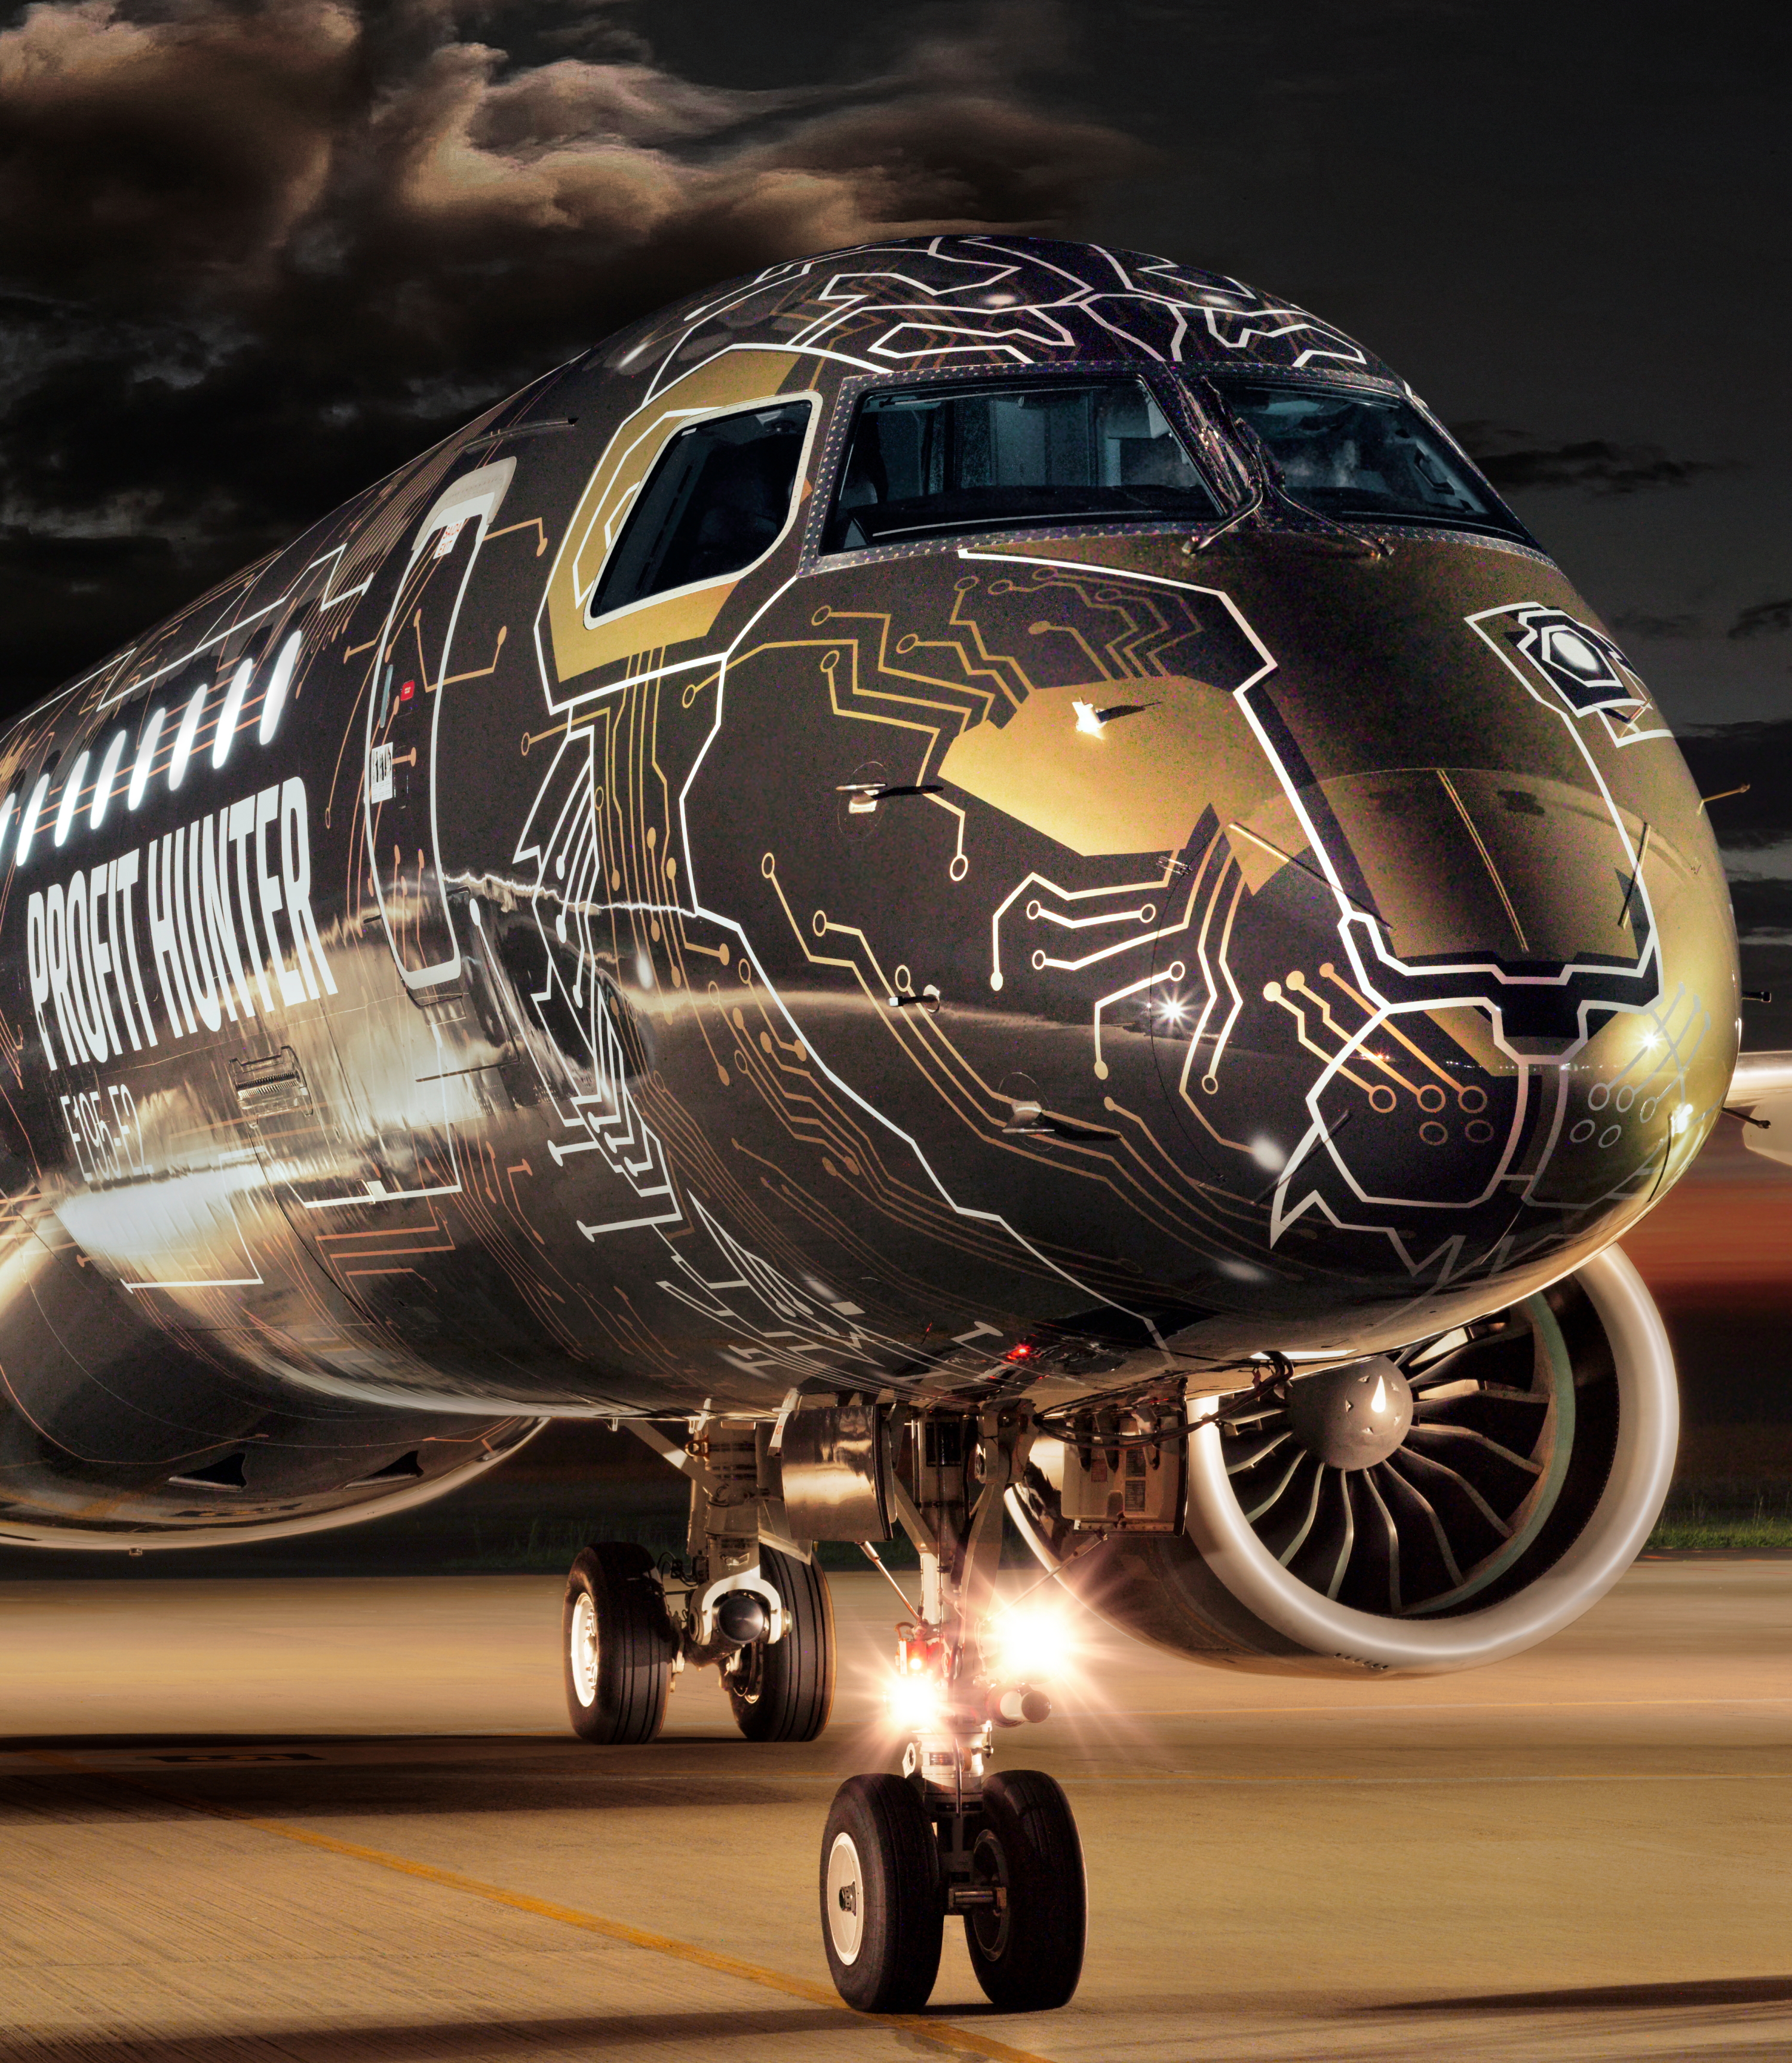 Embraer’s latest Profit Hunter, the E195-E2, will make its Russian debut at the upcoming Moscow Air Show, MAKS-2019, from 27 August - 1 September. The jet features the special ‘Tech Lion’ livery that covers the entire aircraft. Click to enlarge.